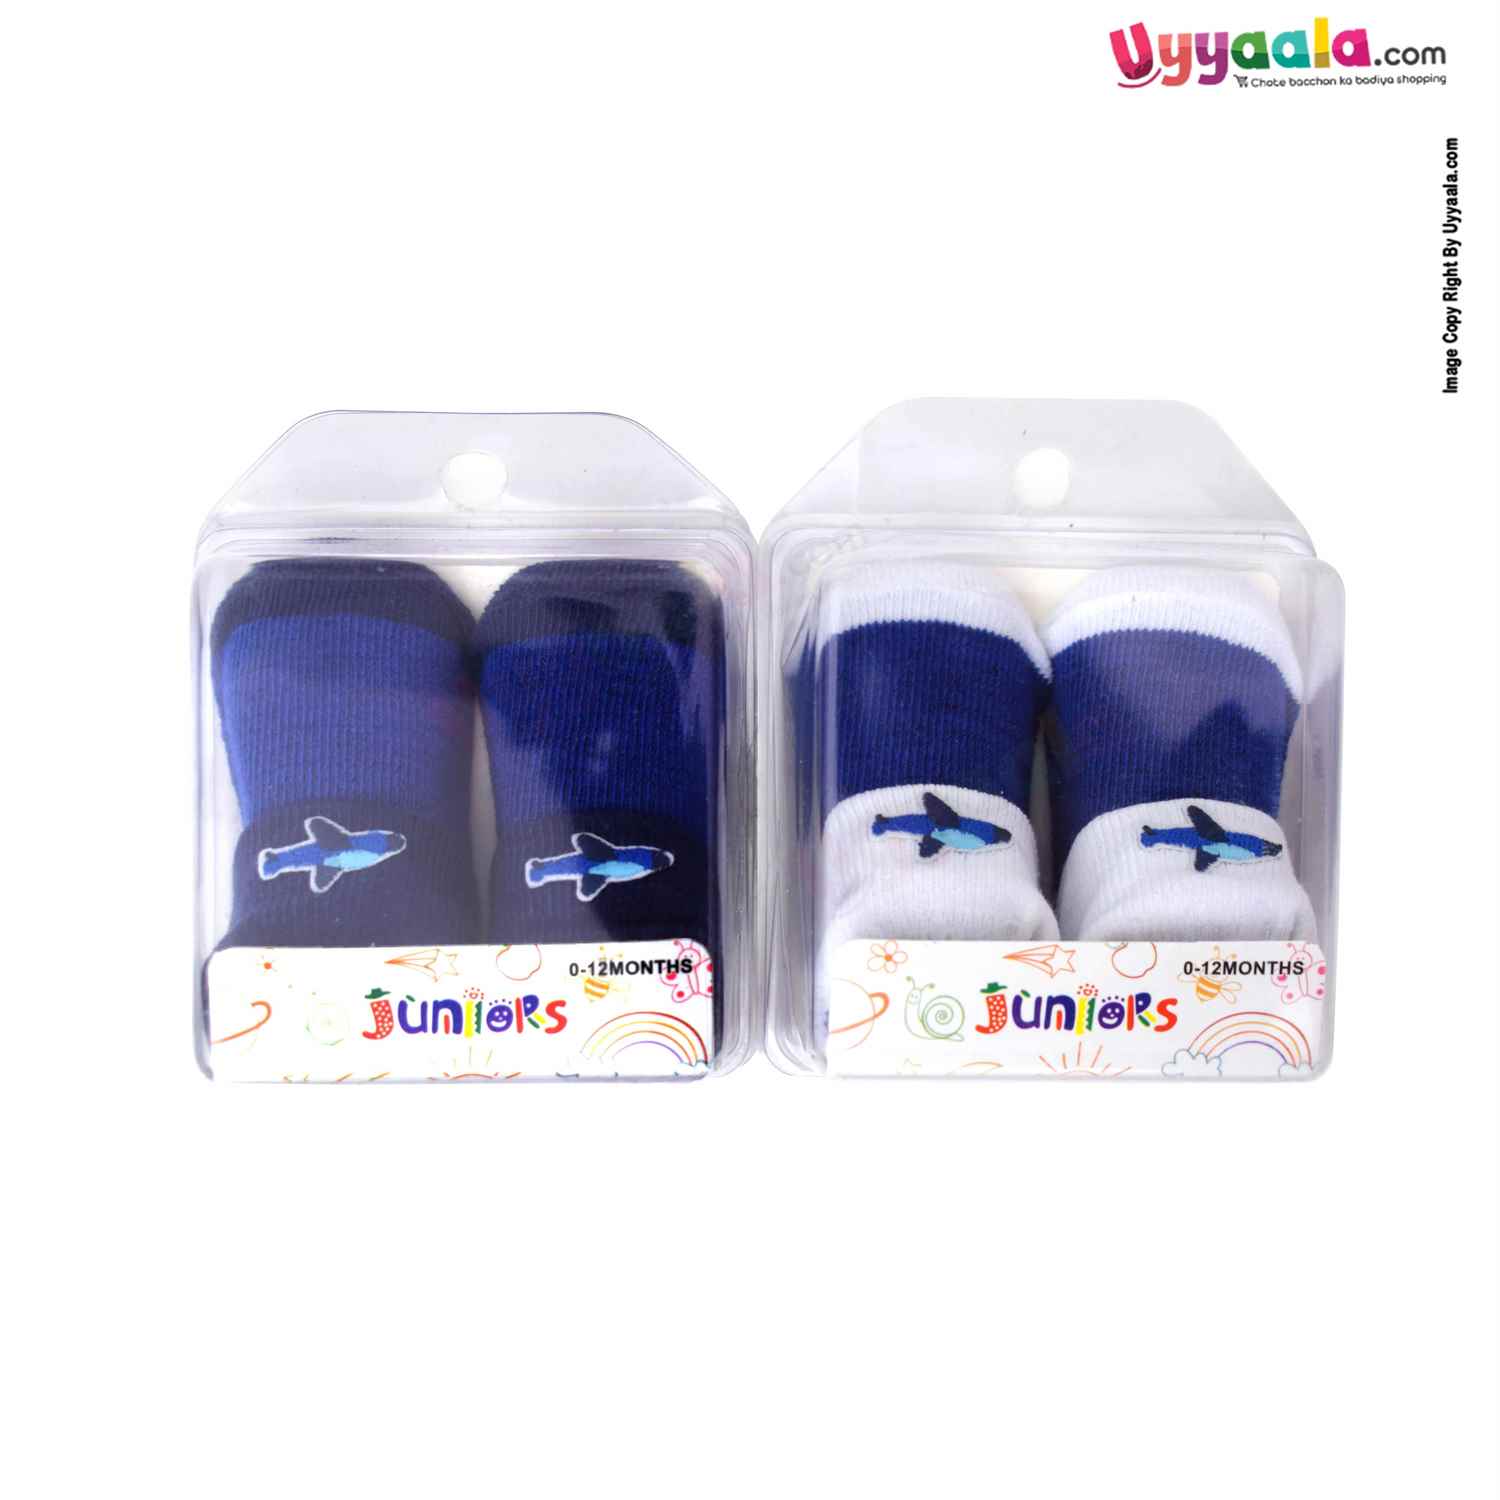 JUNIORS Fashion Socks Aeroplane Character for Babies Pack of 2 , 0-12m Age - Blue & White